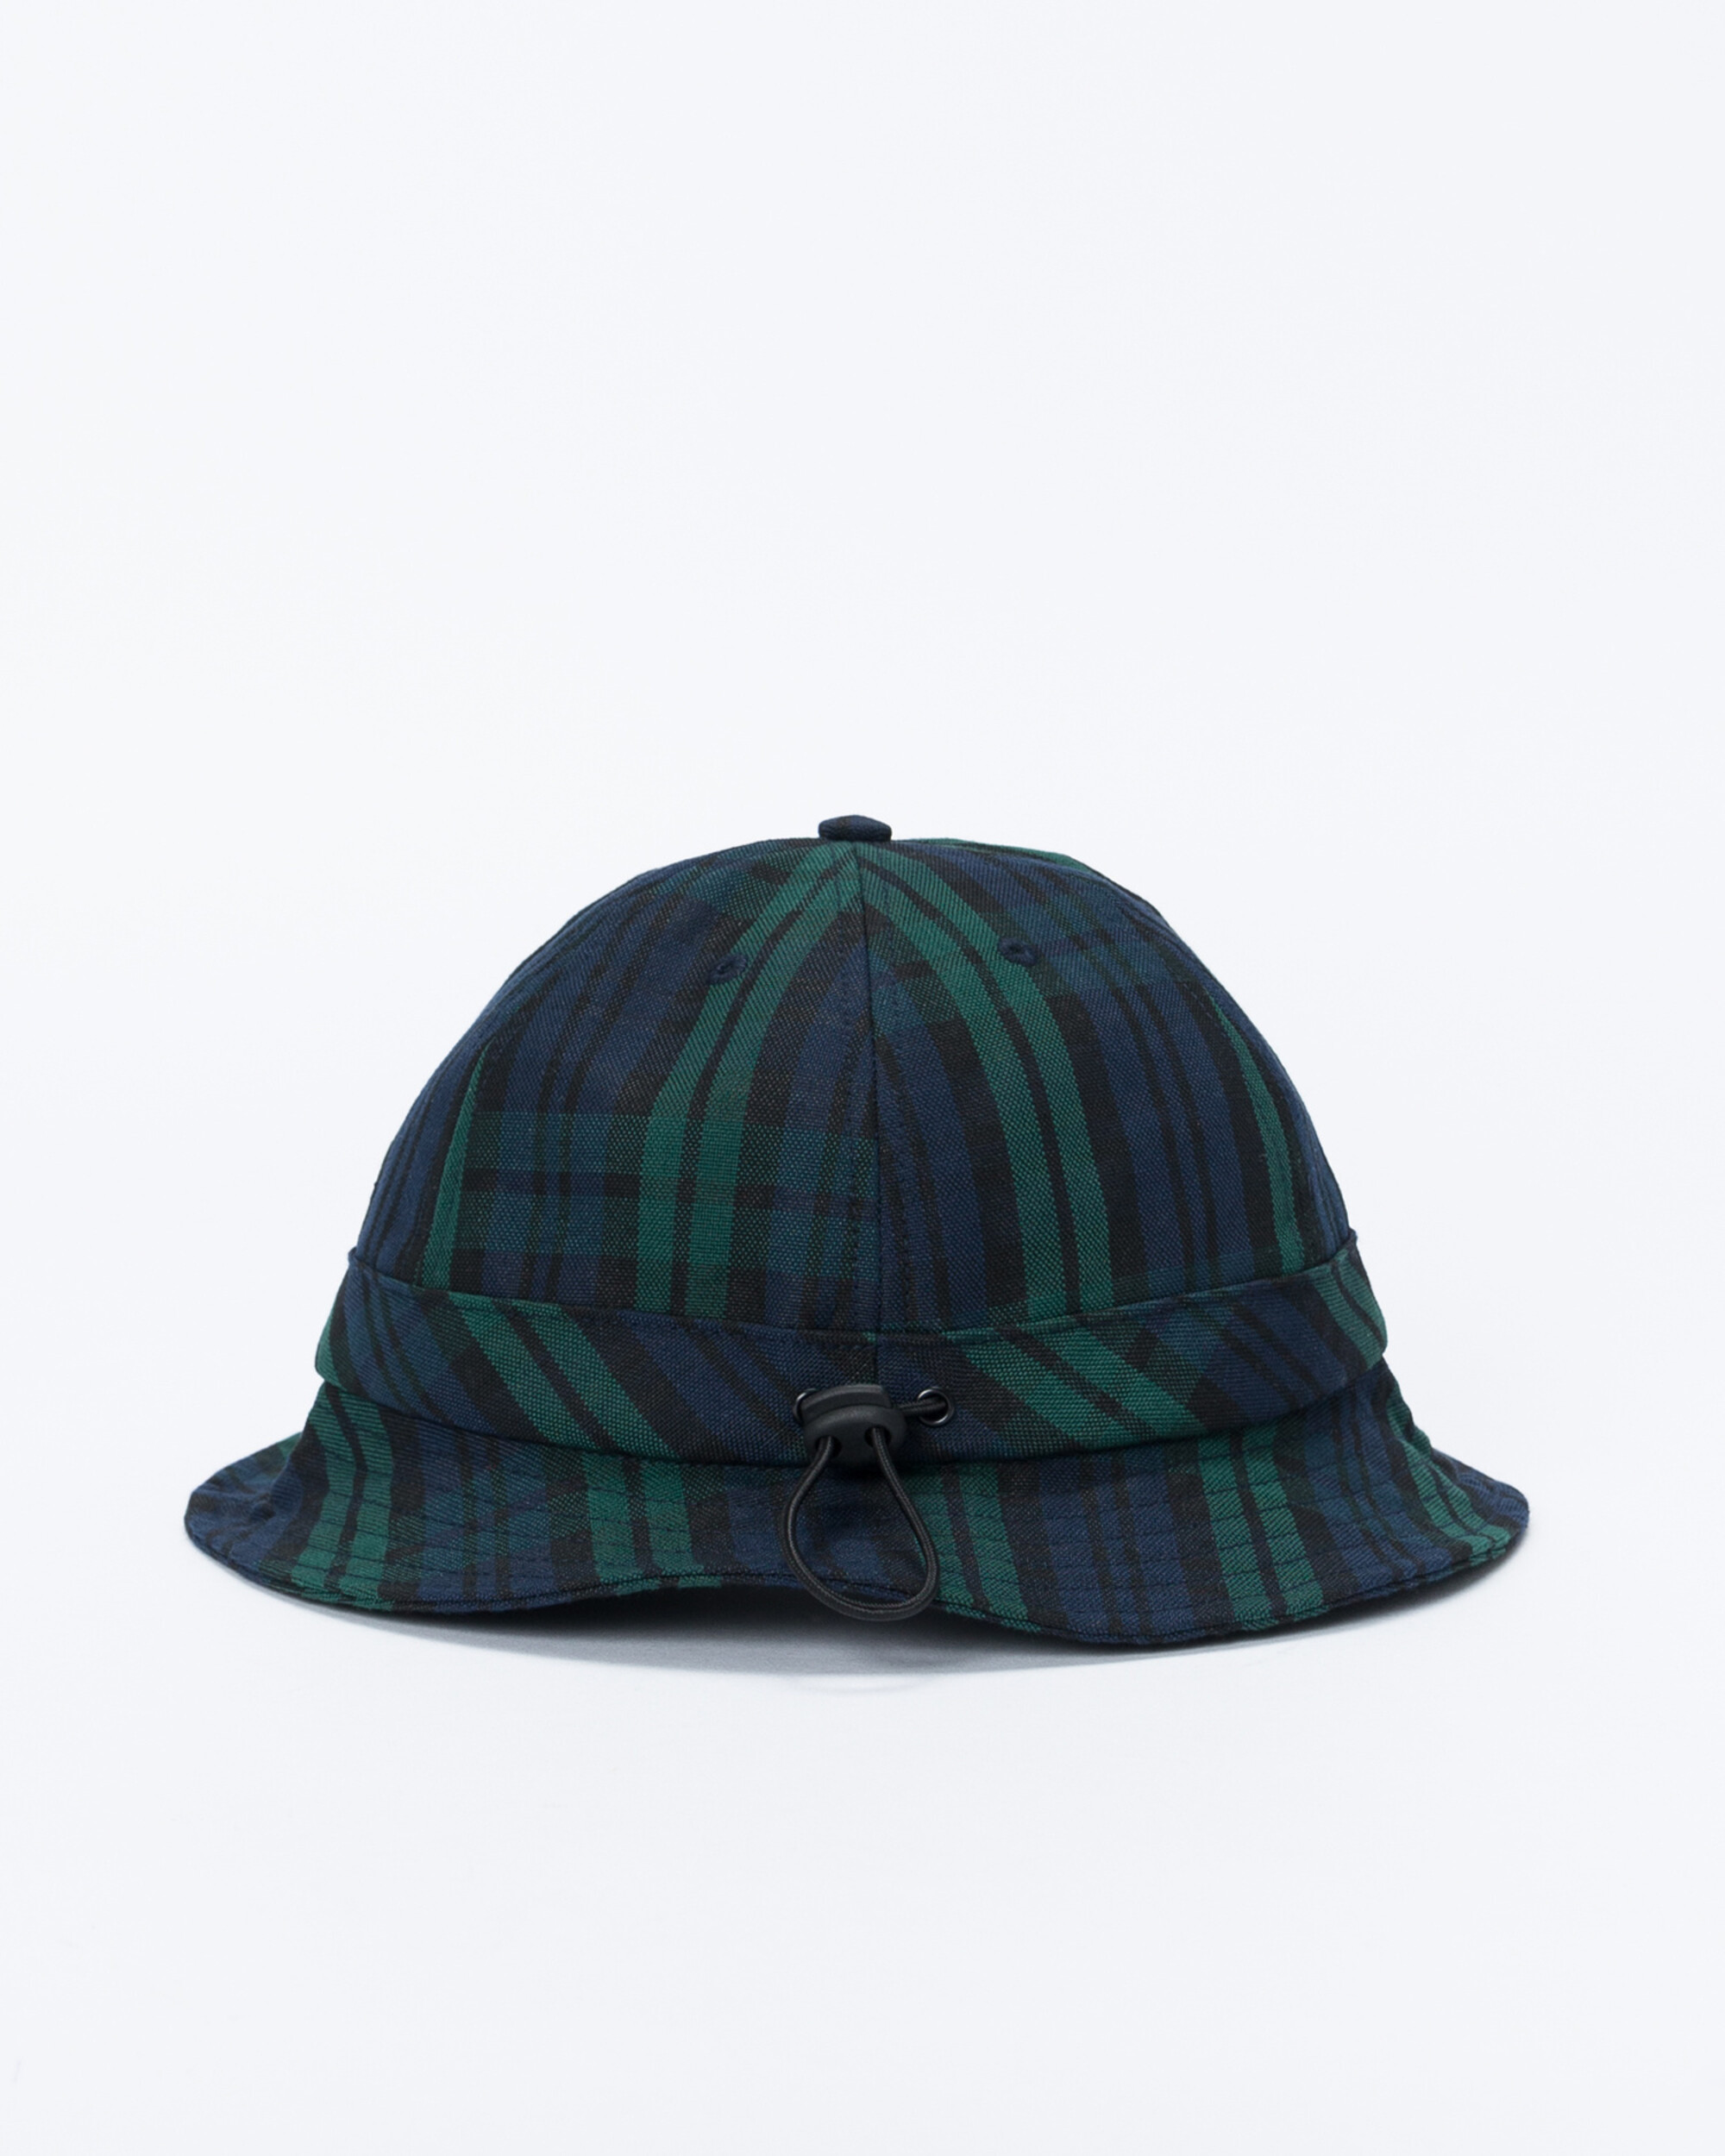 Pop Trading Co bell hat nightwatch plaid